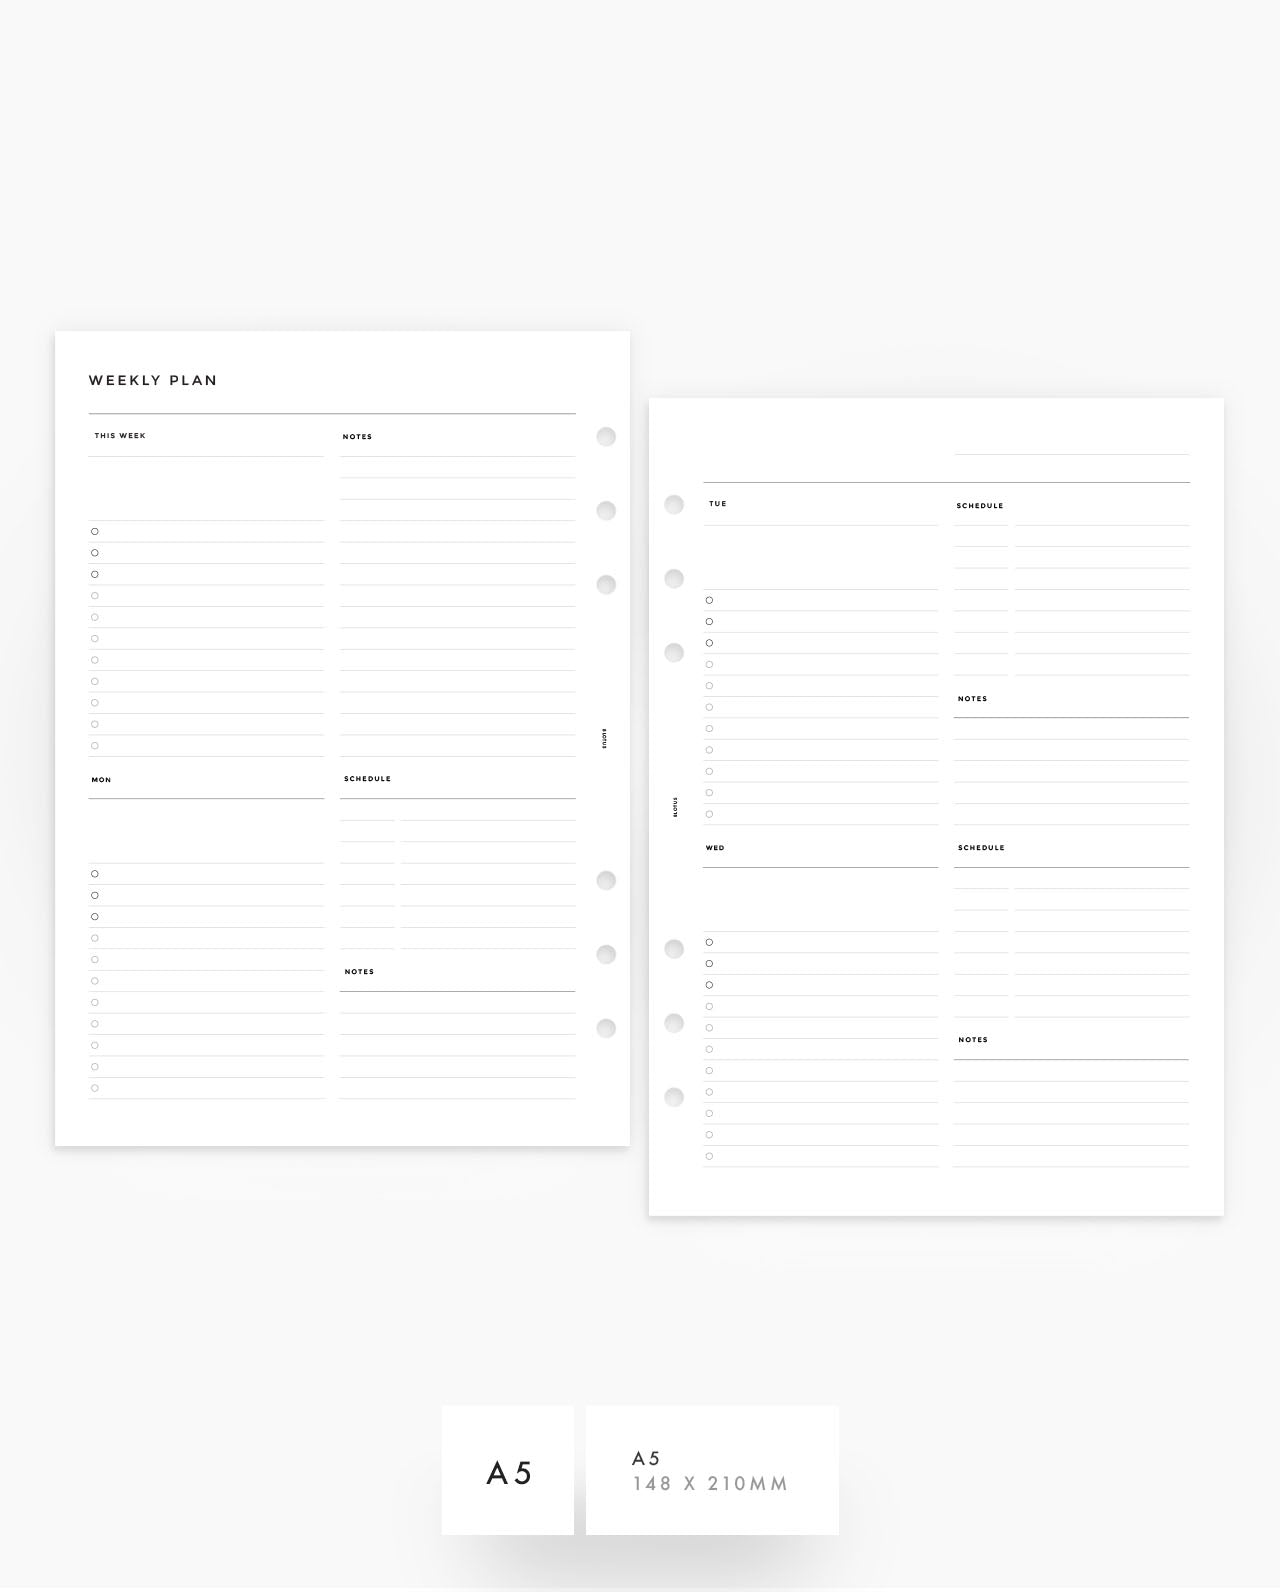 MN079 - Daily Planner Inserts - 2DO1P - PDF